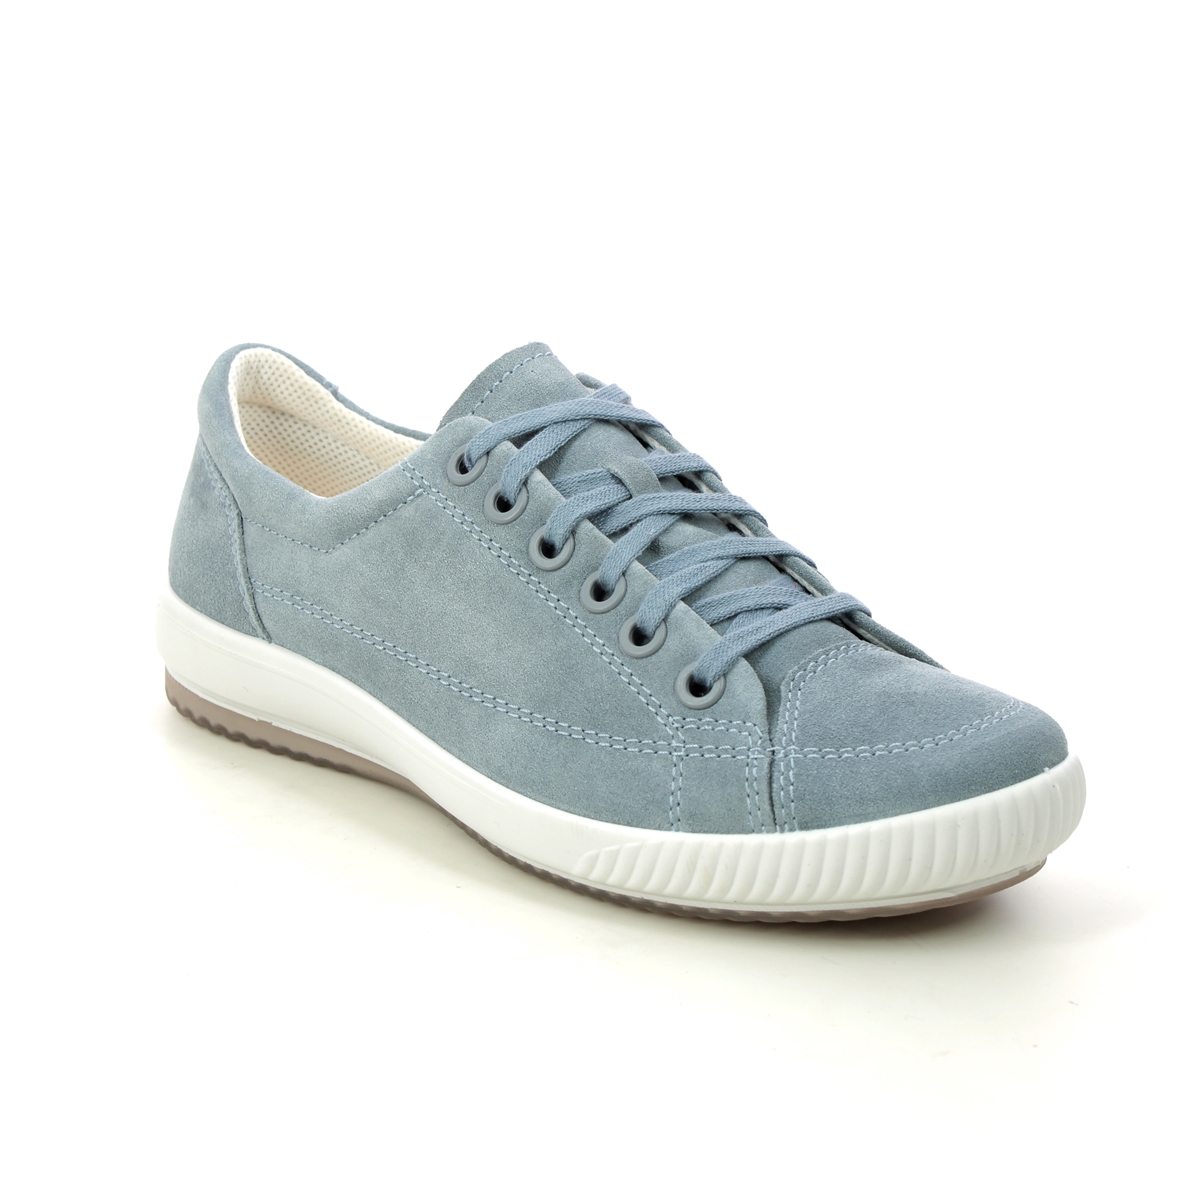 Legero Tanaro 5 Stitch Blue Grey Womens lacing shoes 2000161-8500 in a Plain Leather in Size 3.5